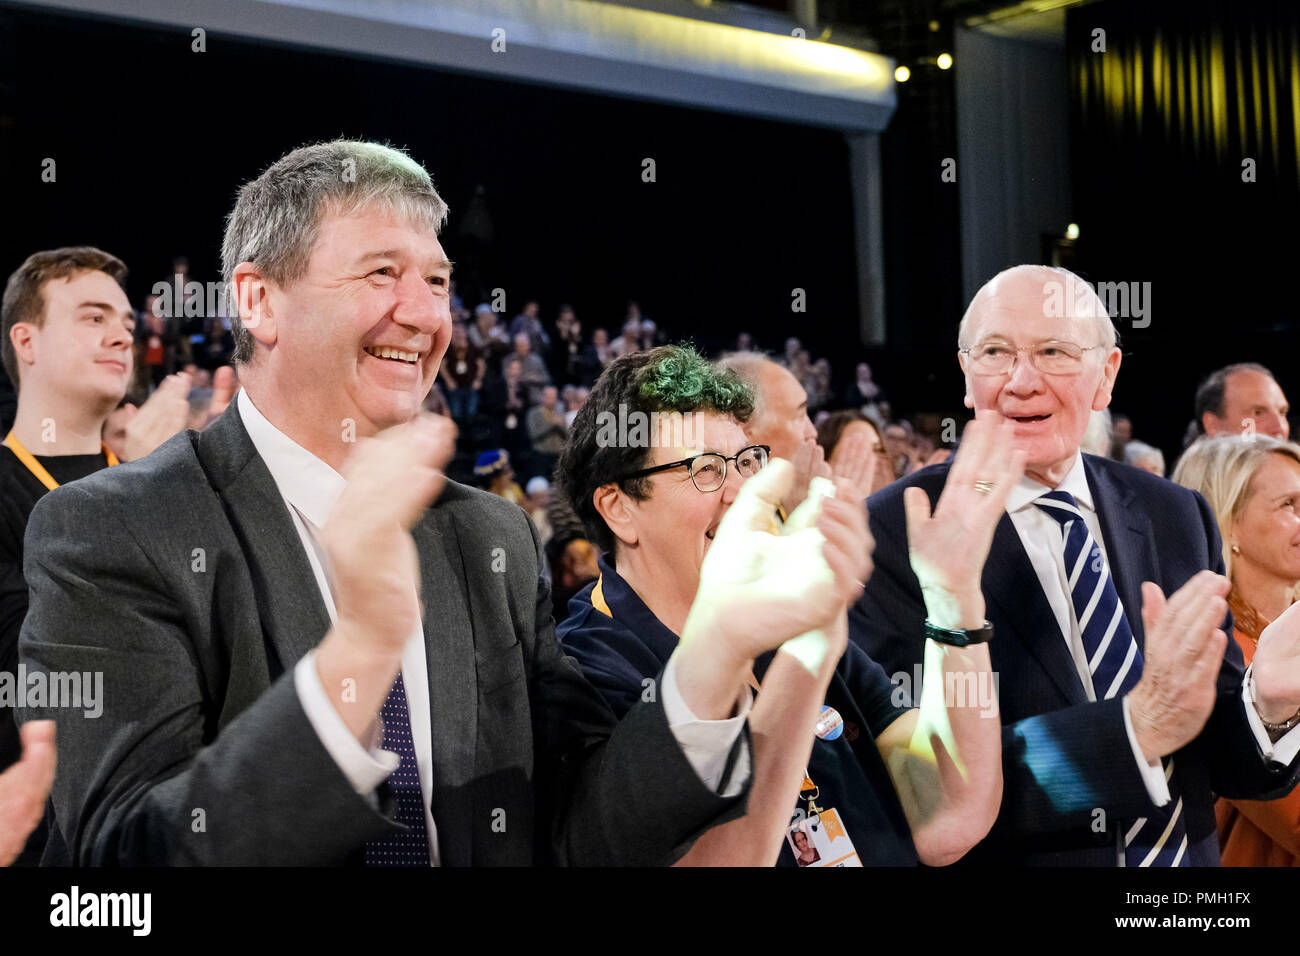 Brighton, UK. 18th September 2018. Willie Rennie is applauded following his speech to the Liberal Democrat Autumn Conference  on Tuesday 18 September 2018 held at Brighton Centre, Sussex. Pictured:  Alistair Carmichael, Commons Chief Whip, Liberal Democrat Spokesperson for Northern Ireland , MP for Orkney and Shetland, and , Menzies Campbell, Liberal Democrat Spokesperson on Defence, congratulate Willie following his speech. Picture by Julie Edwards. Credit: Julie Edwards/Alamy Live News Stock Photo